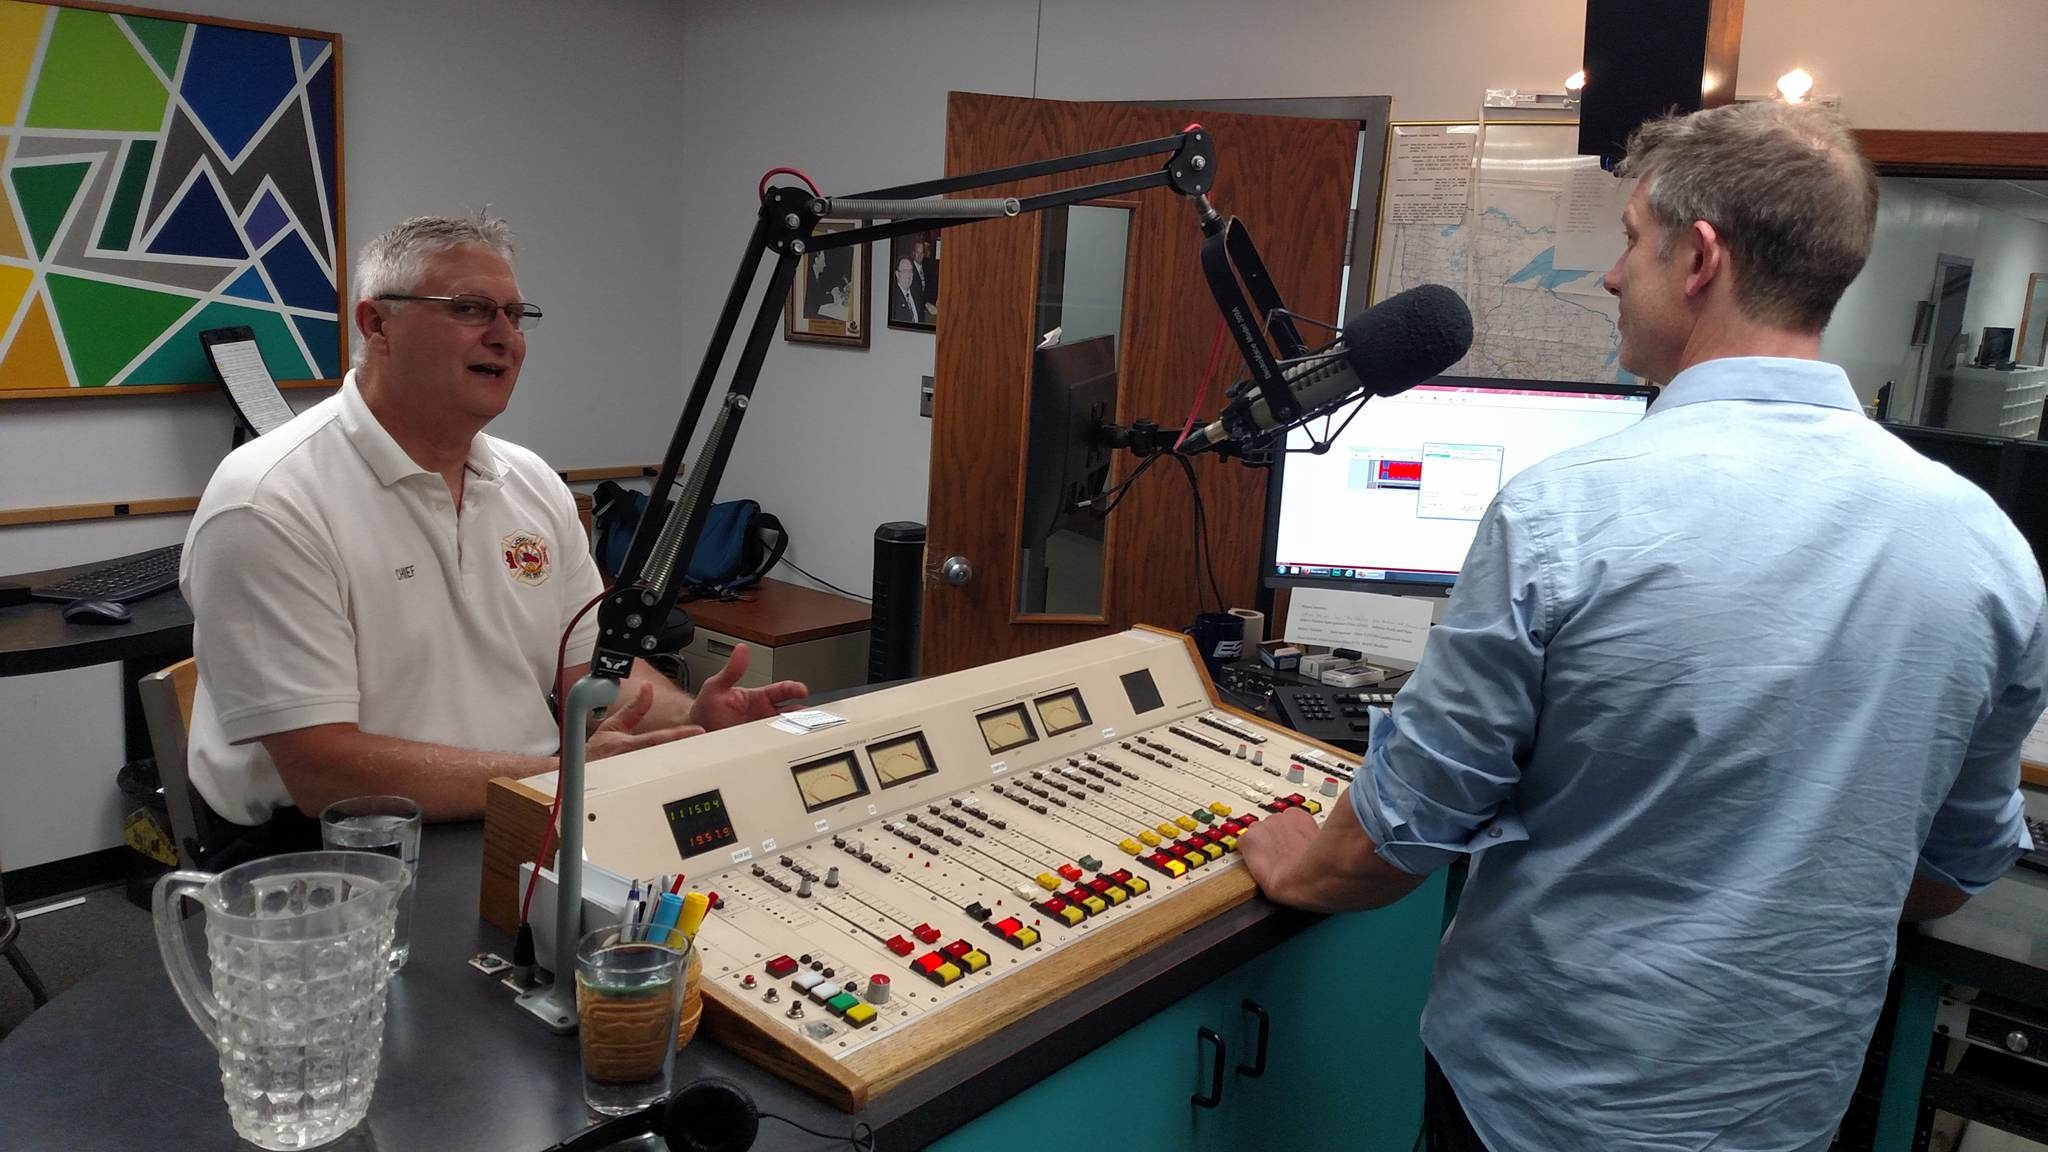 Fire chief Greg Cleveland, whose last day is today, was in the WIZM studio Thursday.